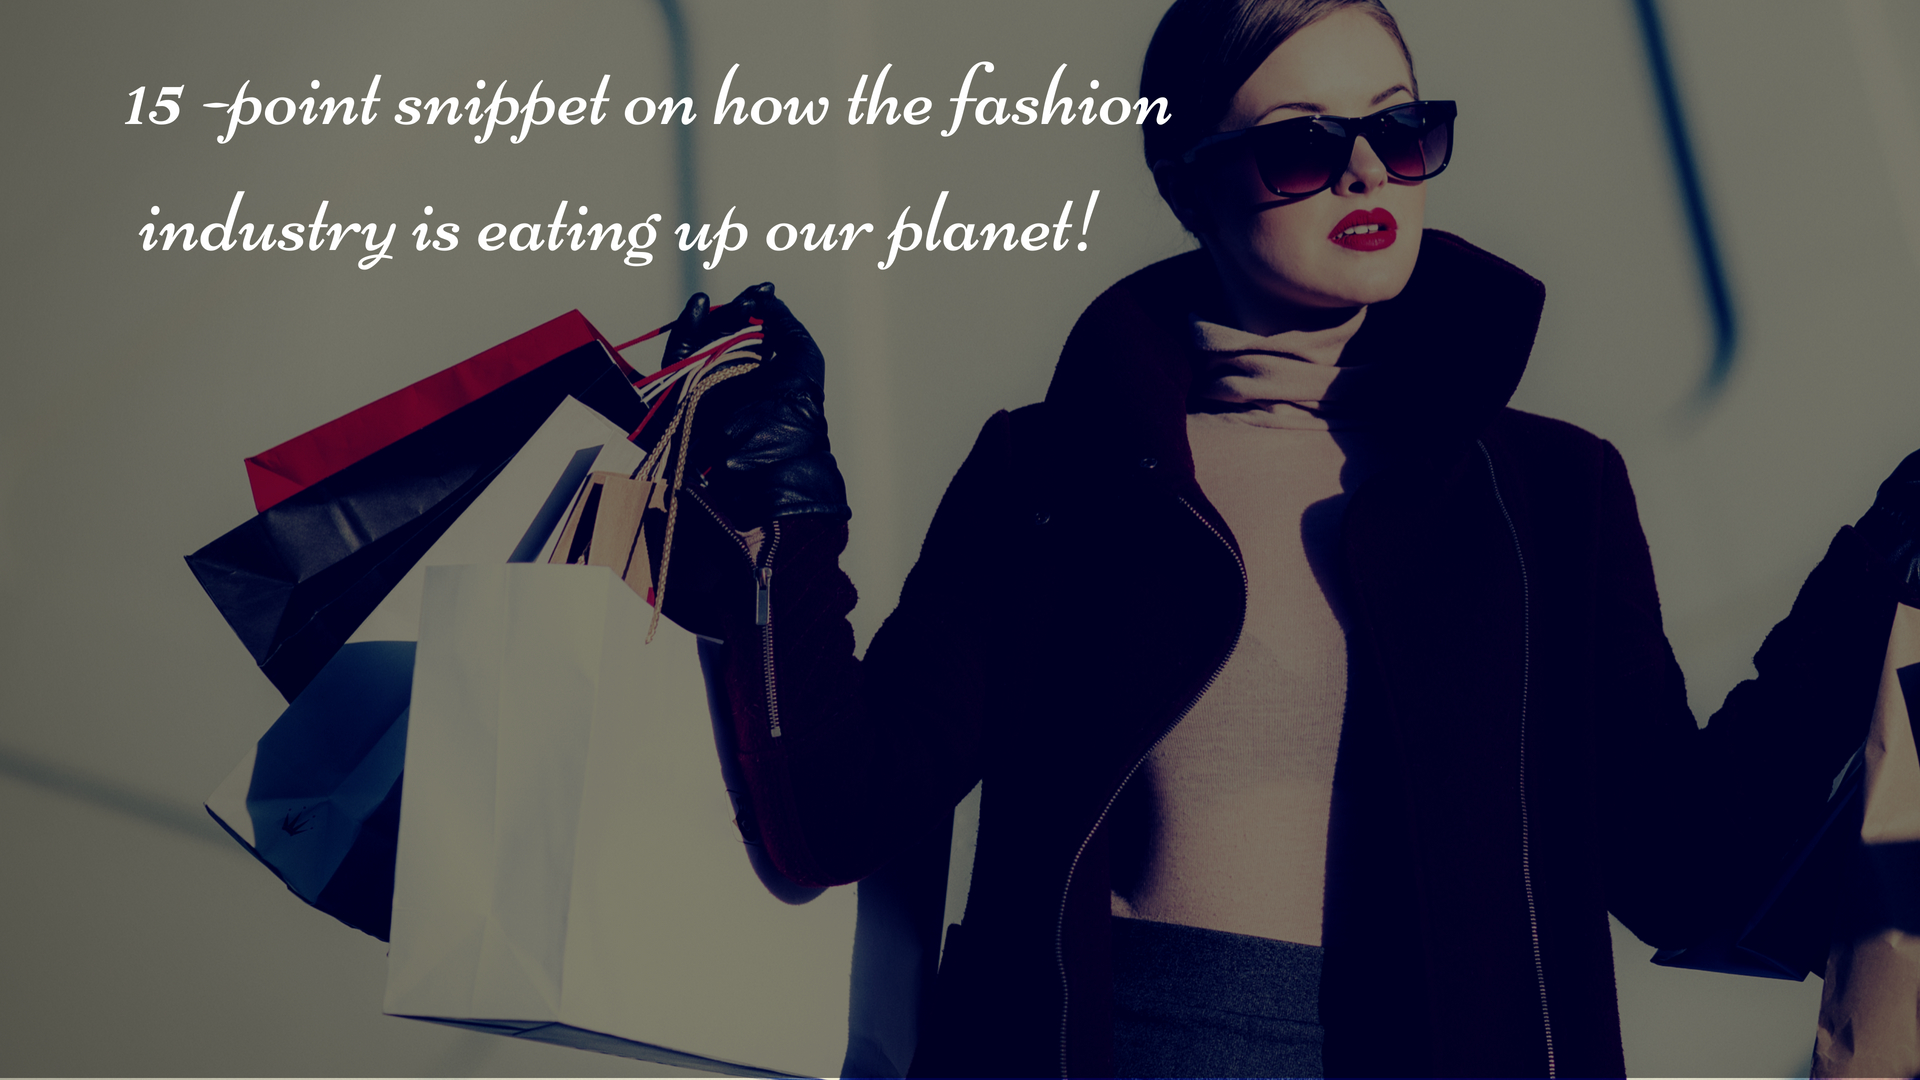 fashion industry eating the planet